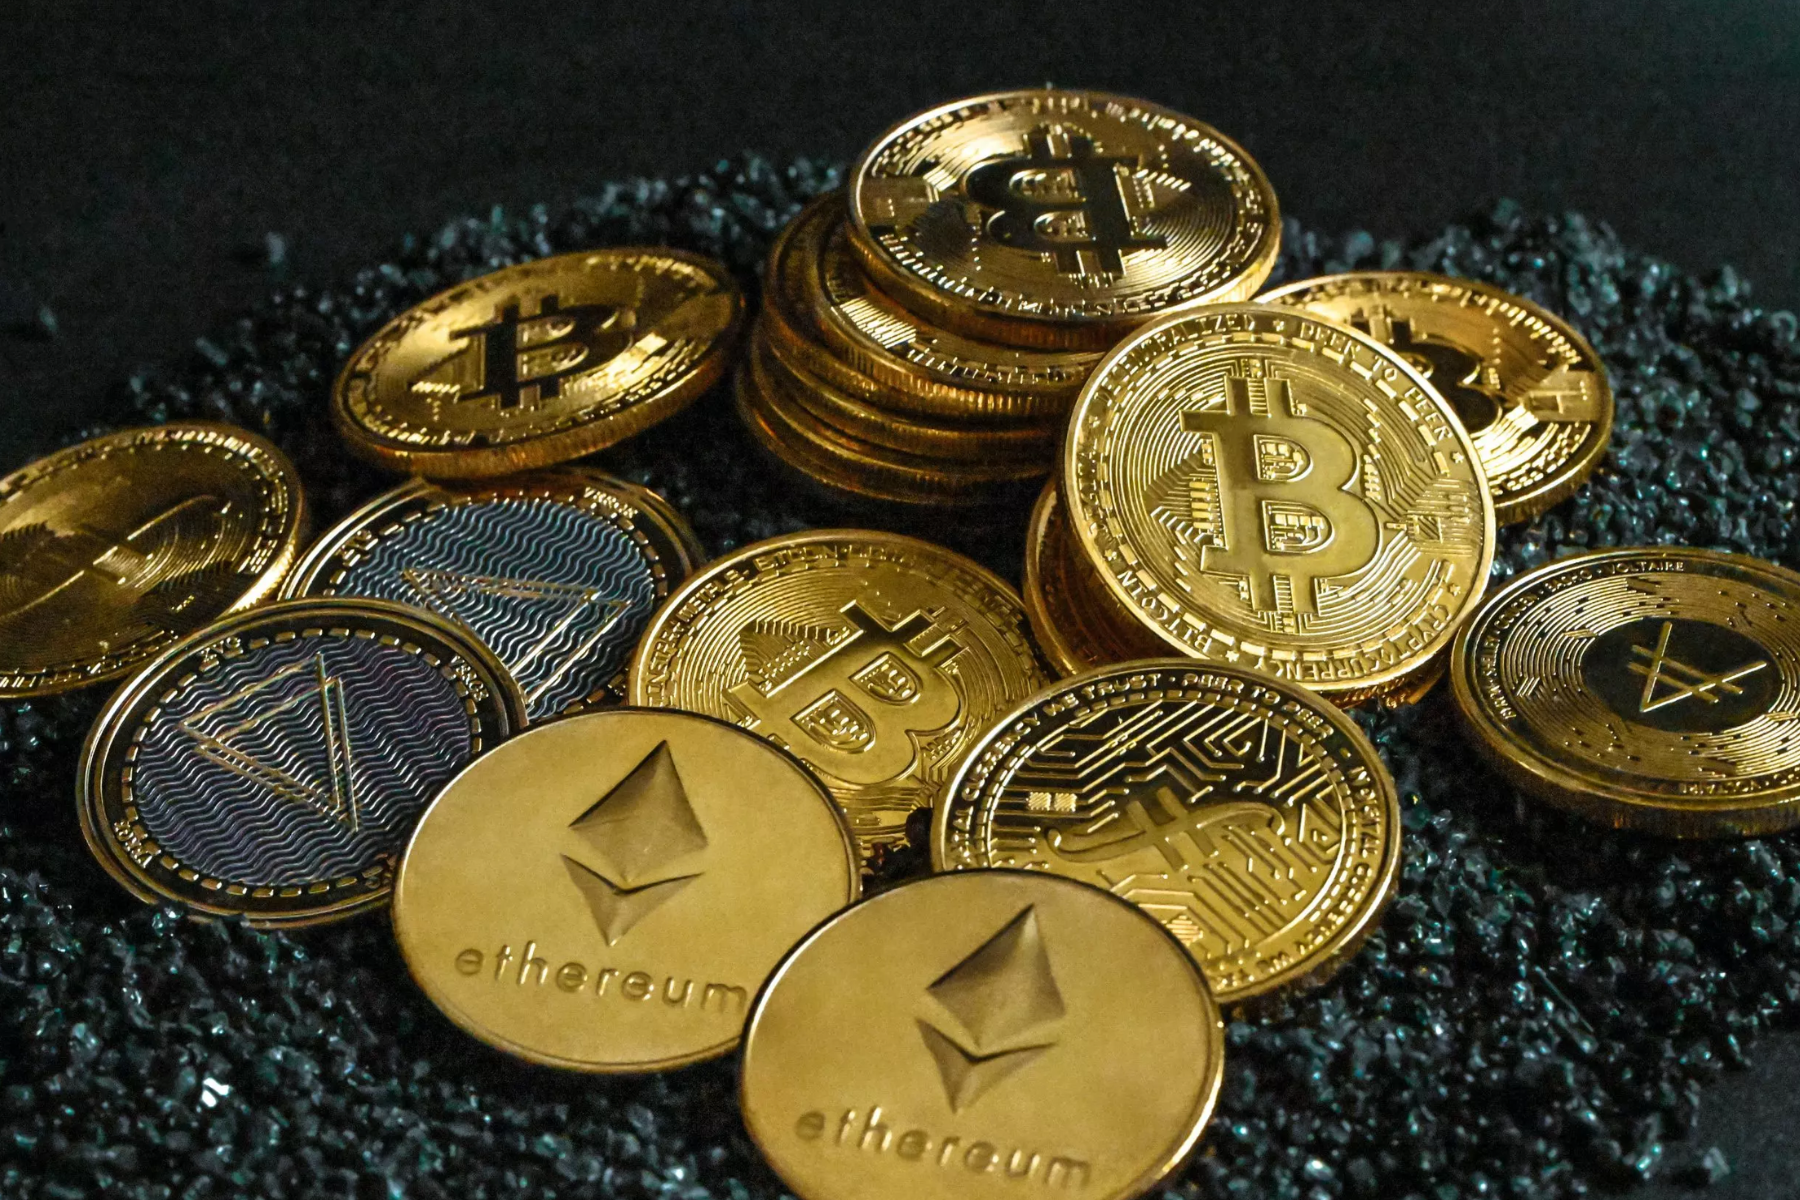 An assortment of cryptocurrency coins